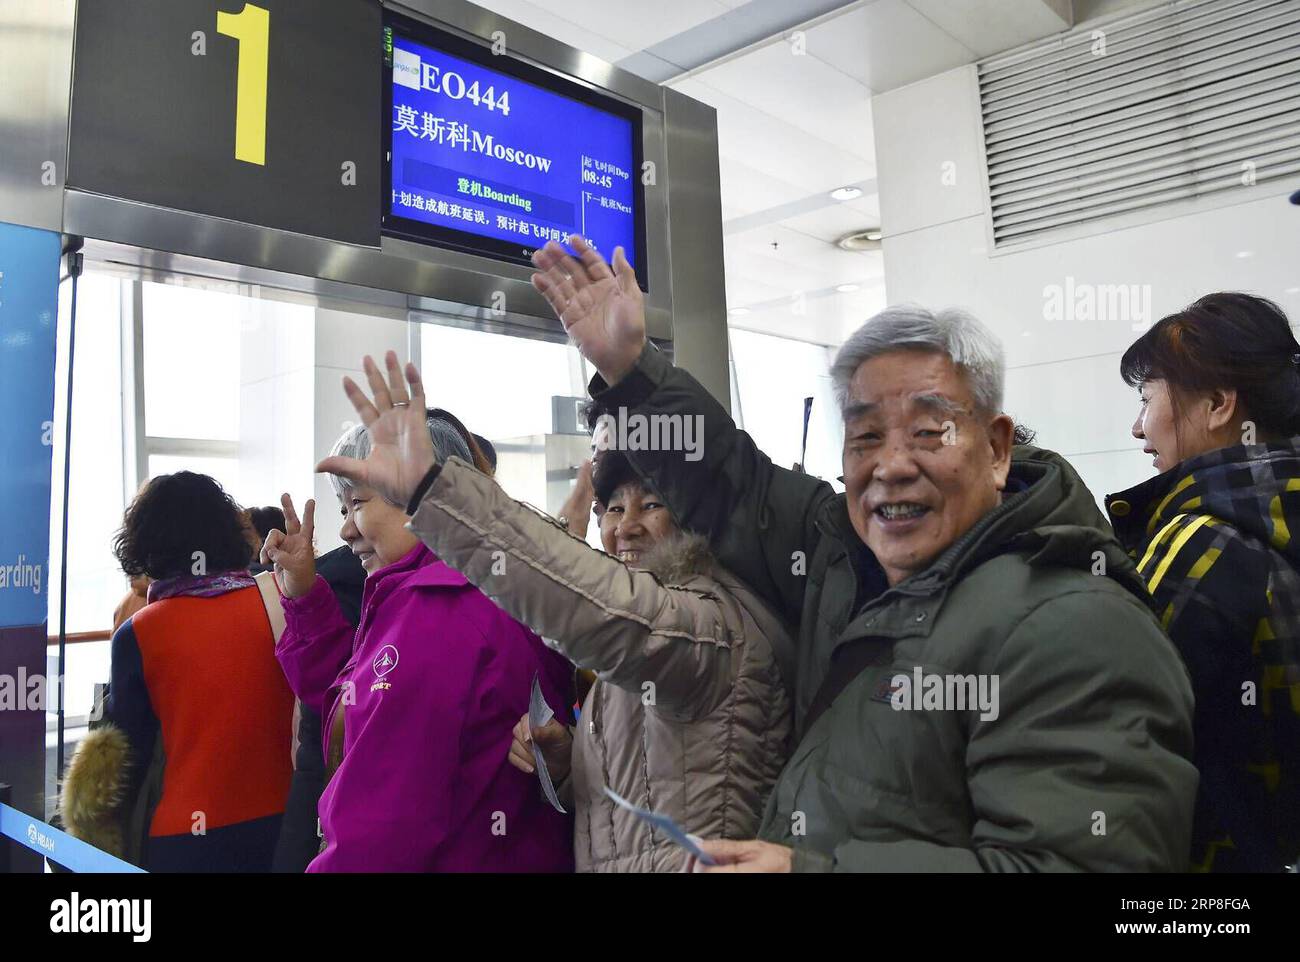 (190303) -- SHIJIAZHUANG , March 3, 2019 (Xinhua) -- Passengers queue to board an airplane heading to Moscow of Russia at the Shijiazhuang Zhengding International Airport in Zhengding, north China s Hebei Province, March 3, 2019. A passenger flight was launched from the Shijiazhuang Zhengding International Airport to Moscow of Russia on Sunday. The flight operates once every Sunday. (Xinhua/Zhang Xiaofeng) CHINA-SHIJIAZHUANG-ZHENGDING AIRPORT (CN) PUBLICATIONxNOTxINxCHN Stock Photo